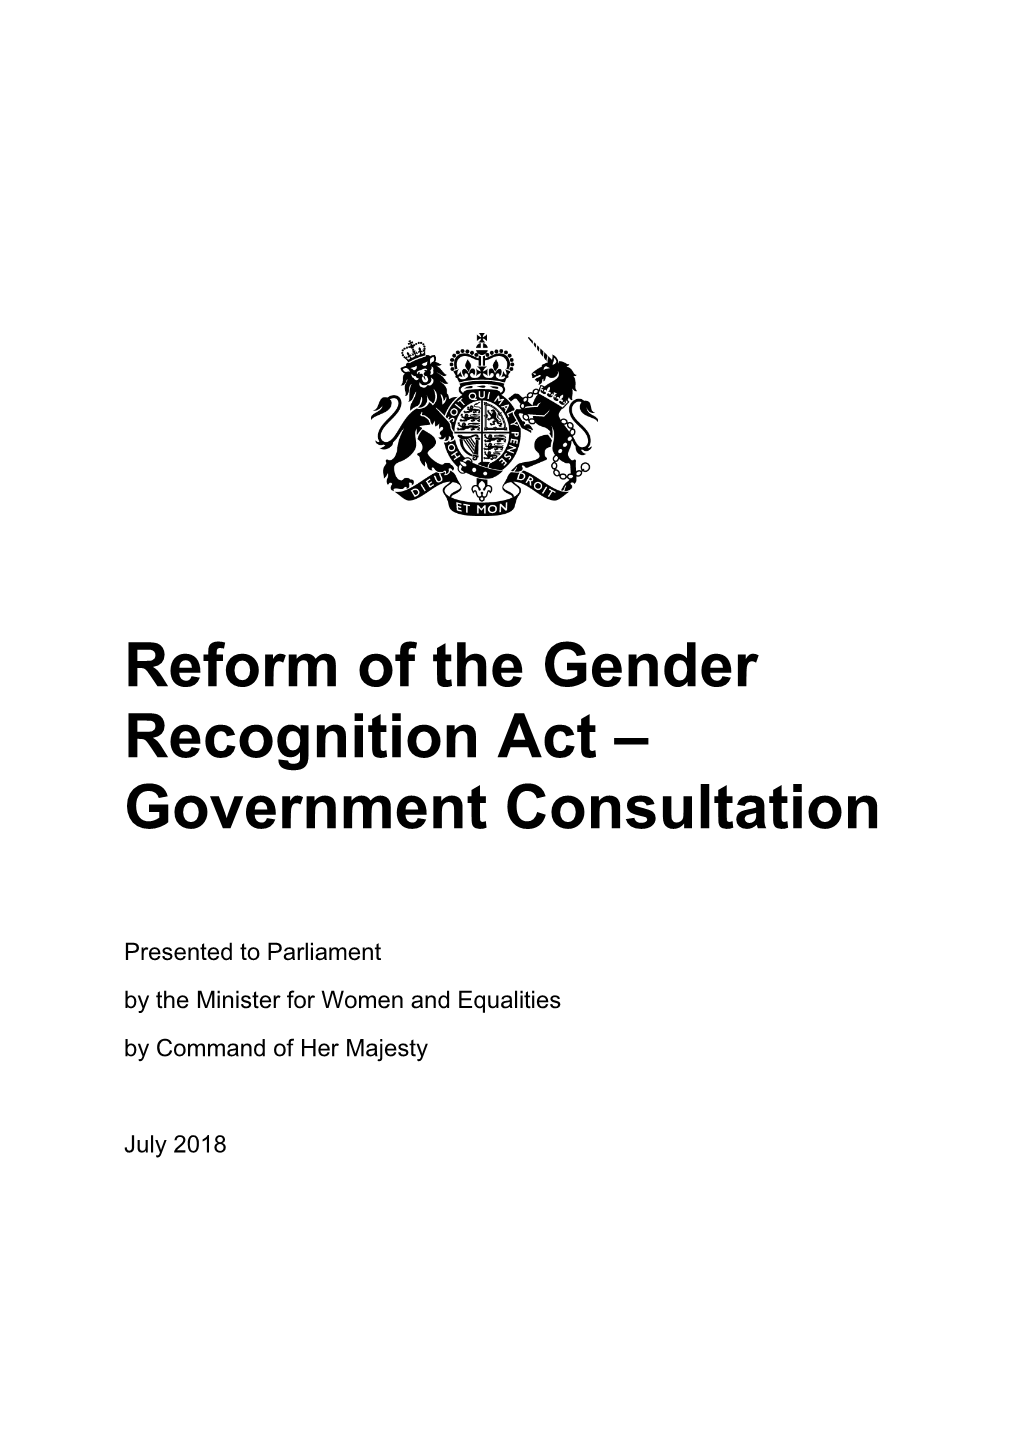 Reform of the Gender Recognition Act – Government Consultation